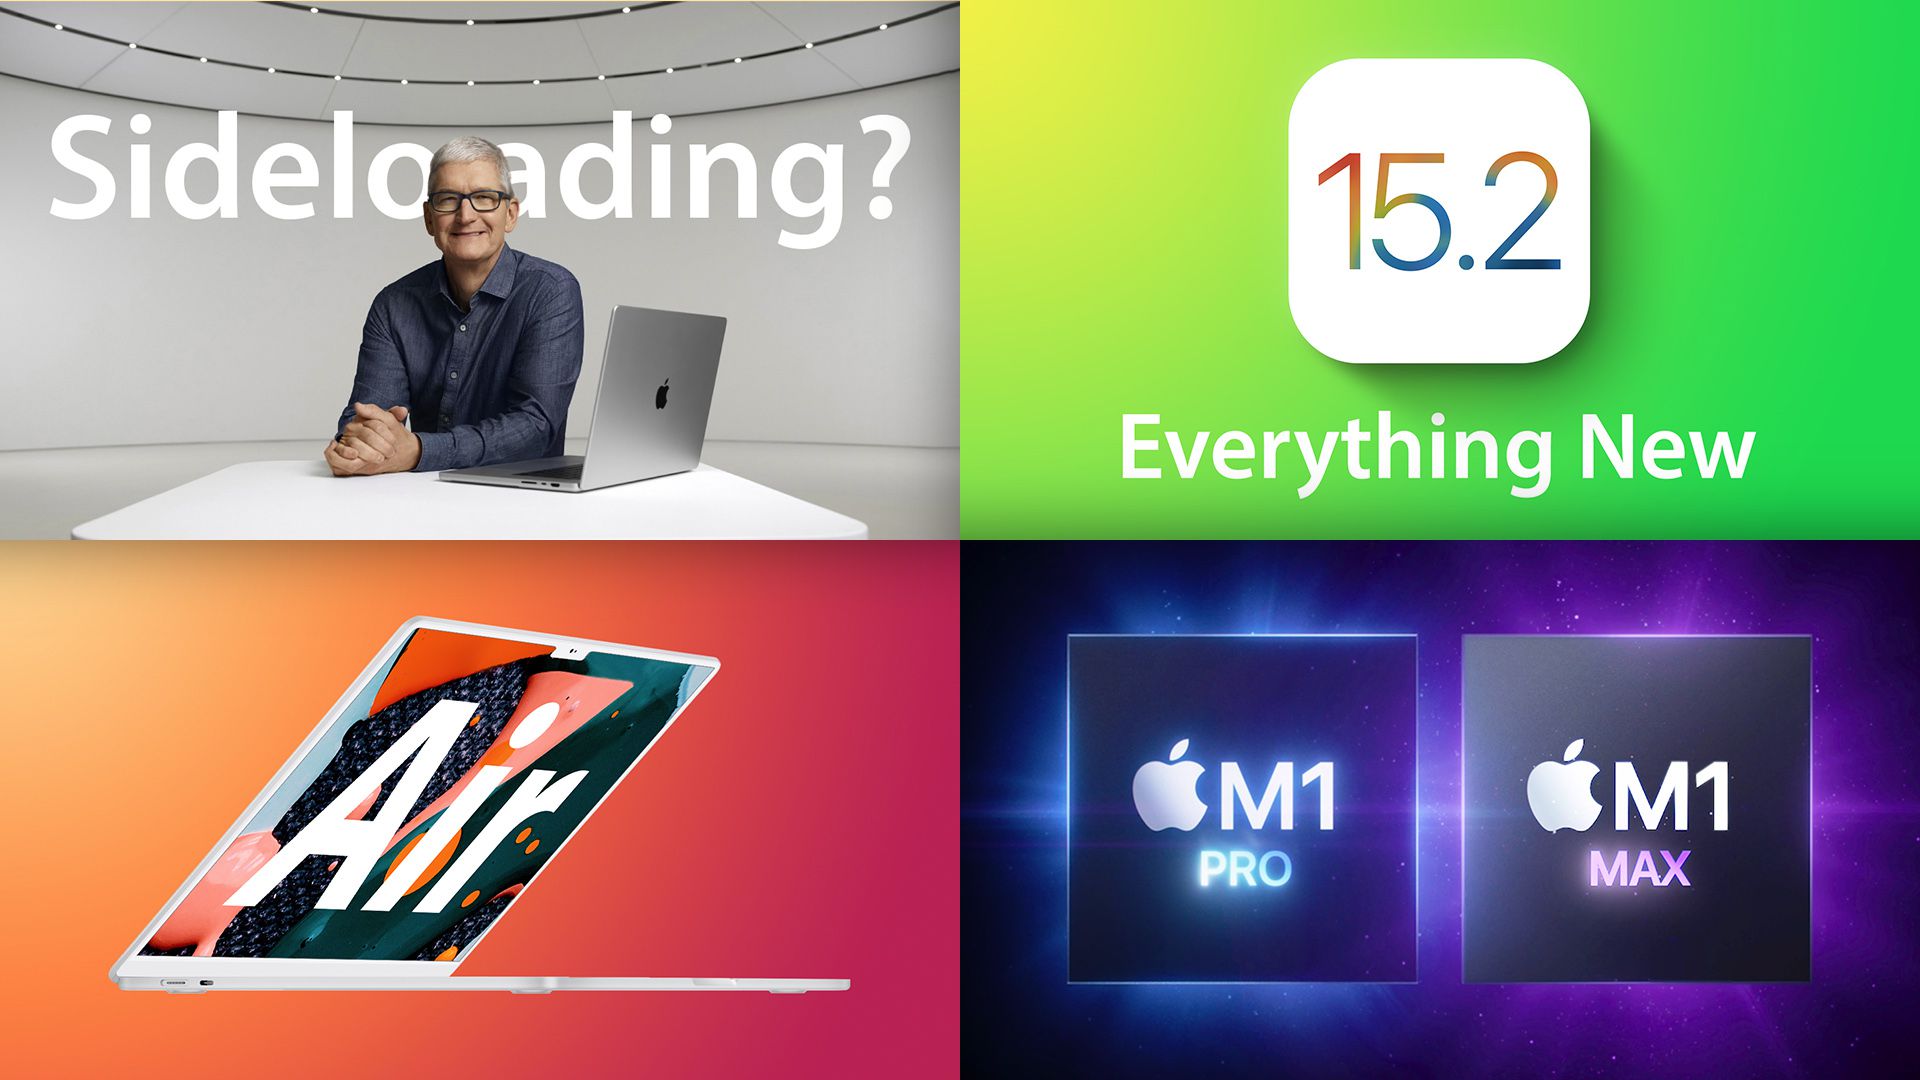 Top Stories: Tim Cook on Sideloading, iOS 15.2 Features, Apple Silicon Roadmap, ..